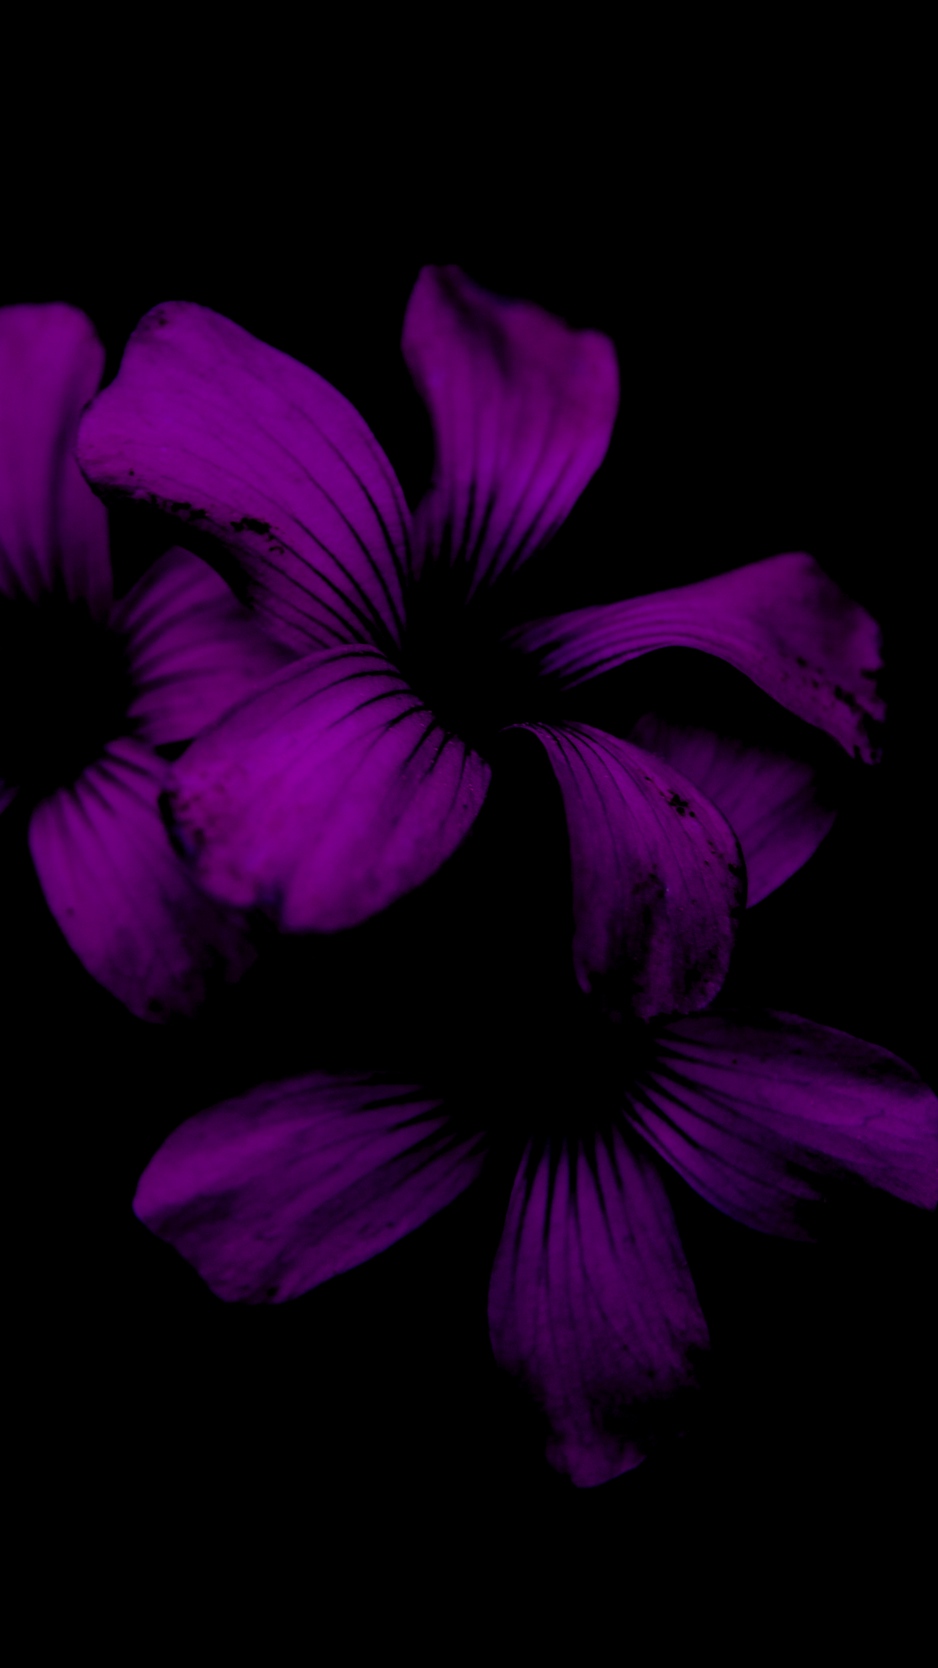 Related Wallpapers Lilac Flower Dark Purple Flower Wallpaper For Iphone 2049122 Hd Wallpaper Backgrounds Download